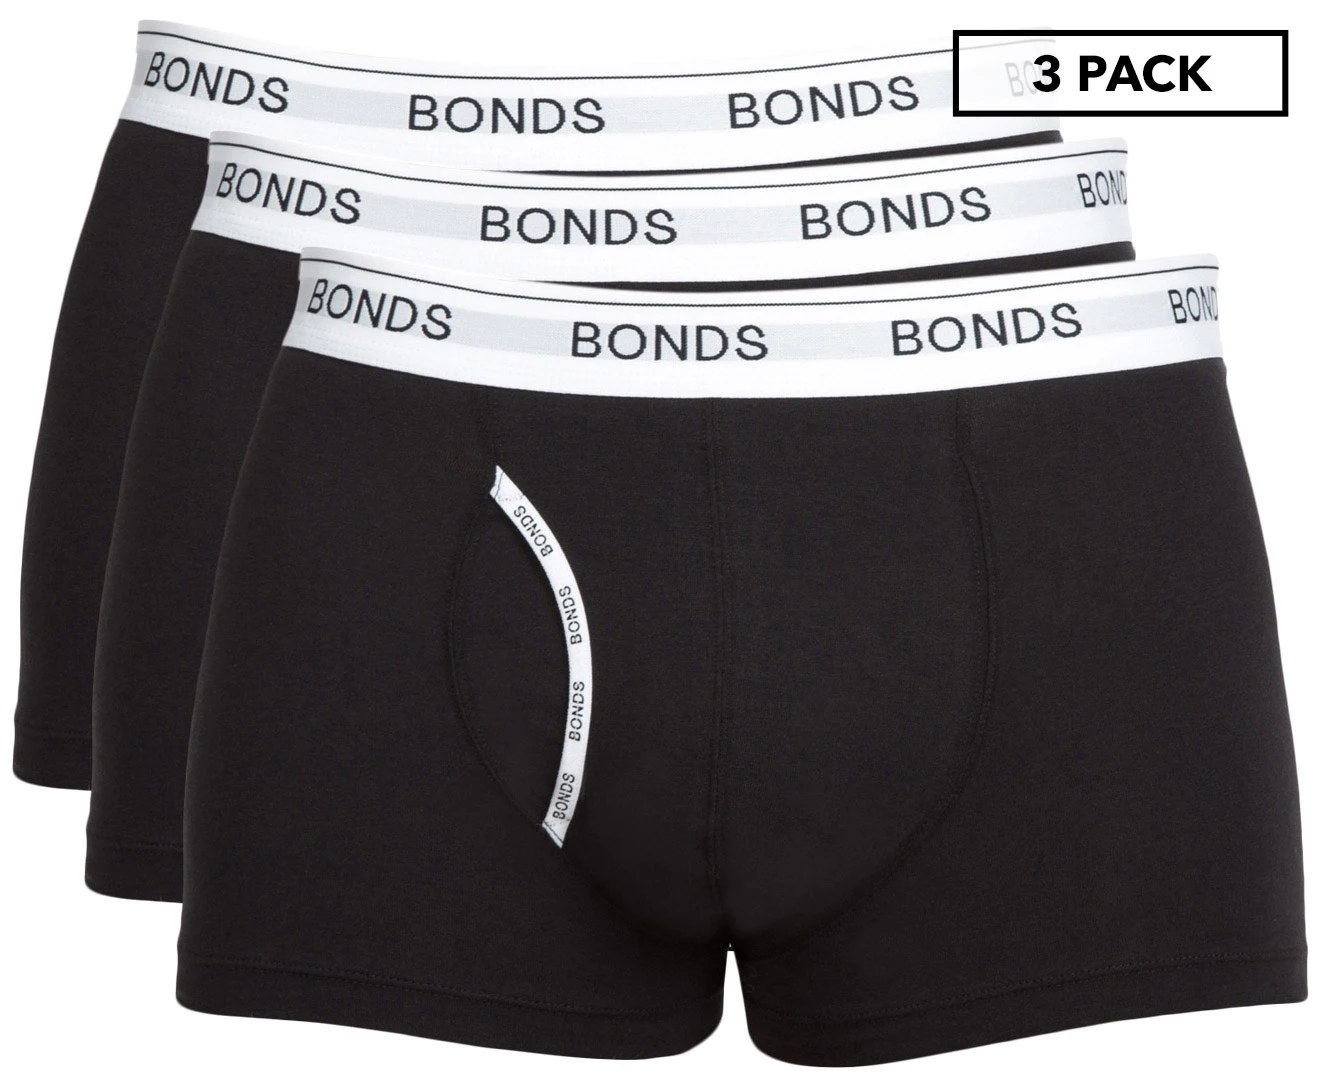 Bonds Underwear for the Family, Briefs, Rompers, Socks and More